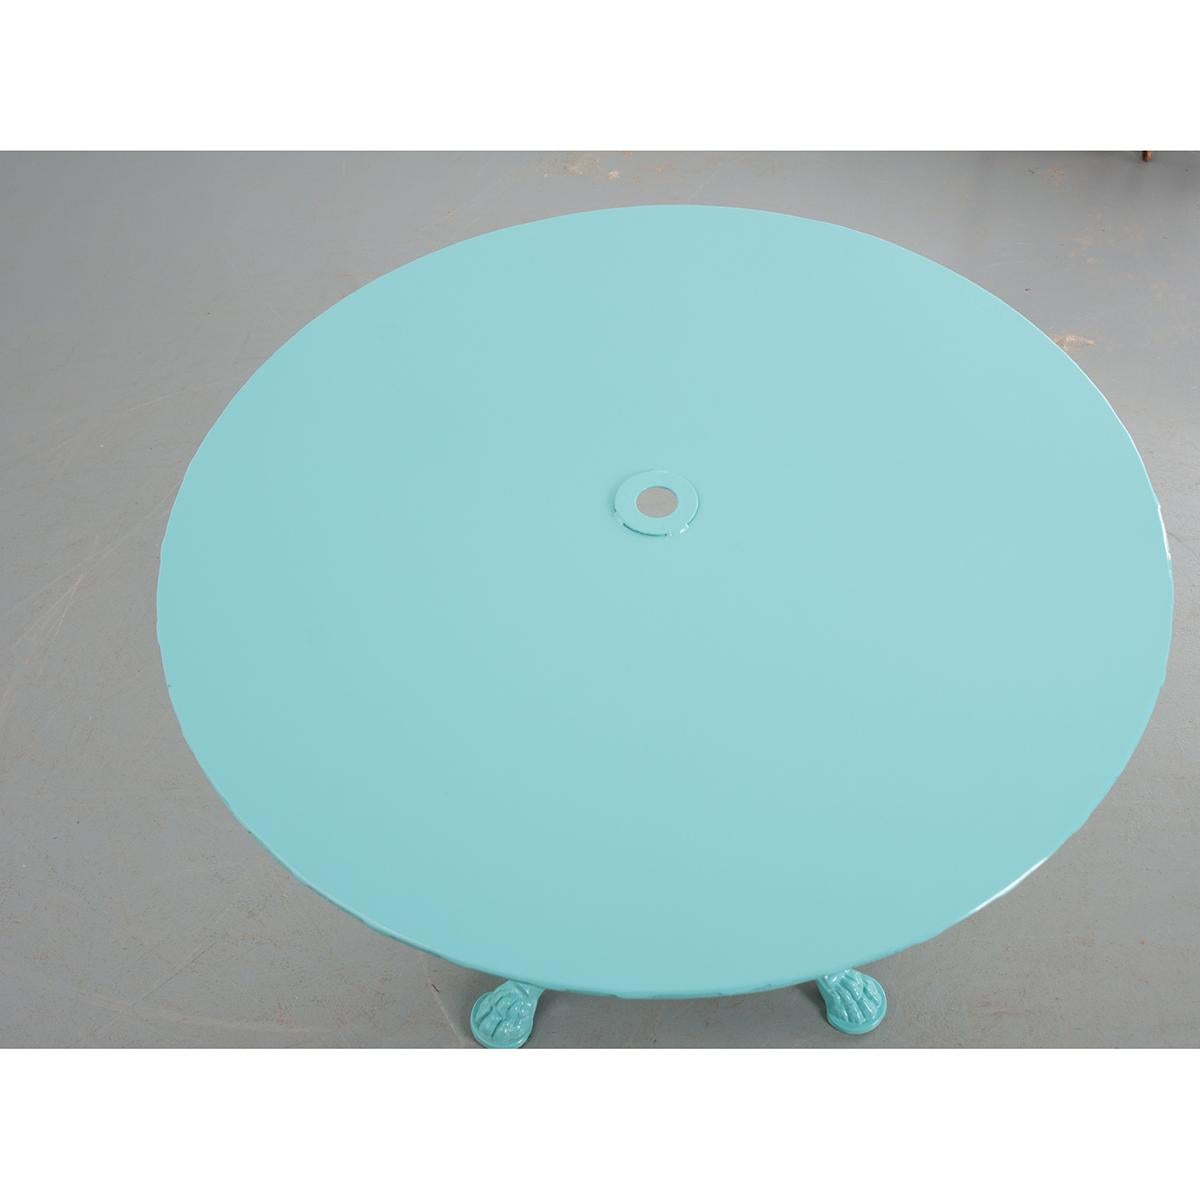 This is a French vintage metal garden table. It has been recently sandblasted and powder coated for weather protection. The colorful table would liven up any garden.